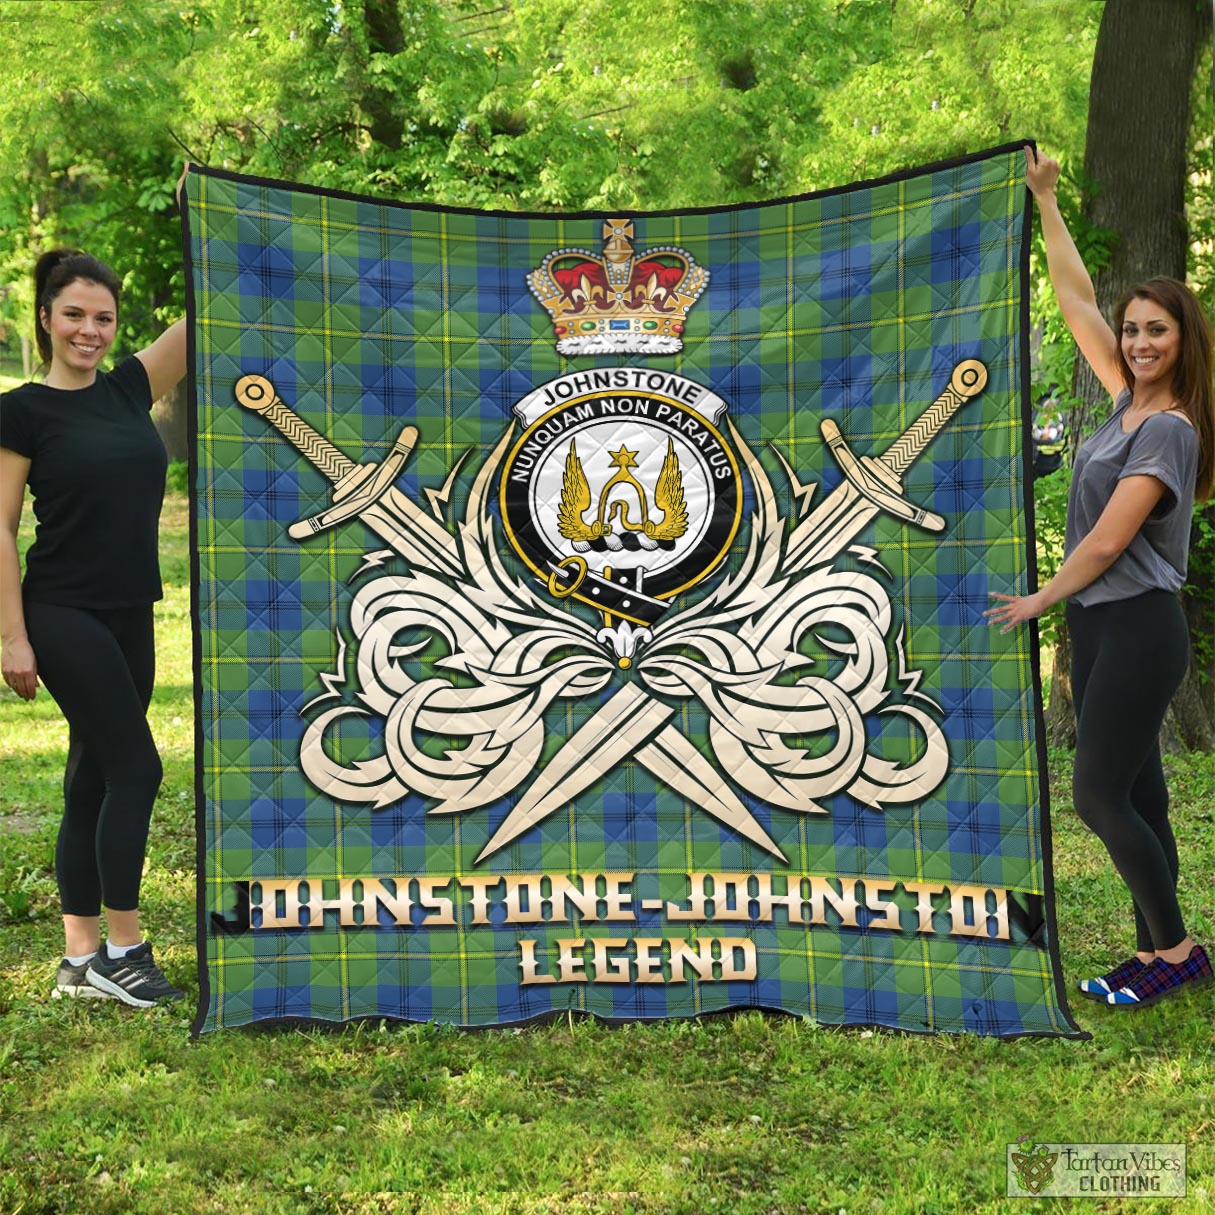 Tartan Vibes Clothing Johnstone-Johnston Ancient Tartan Quilt with Clan Crest and the Golden Sword of Courageous Legacy